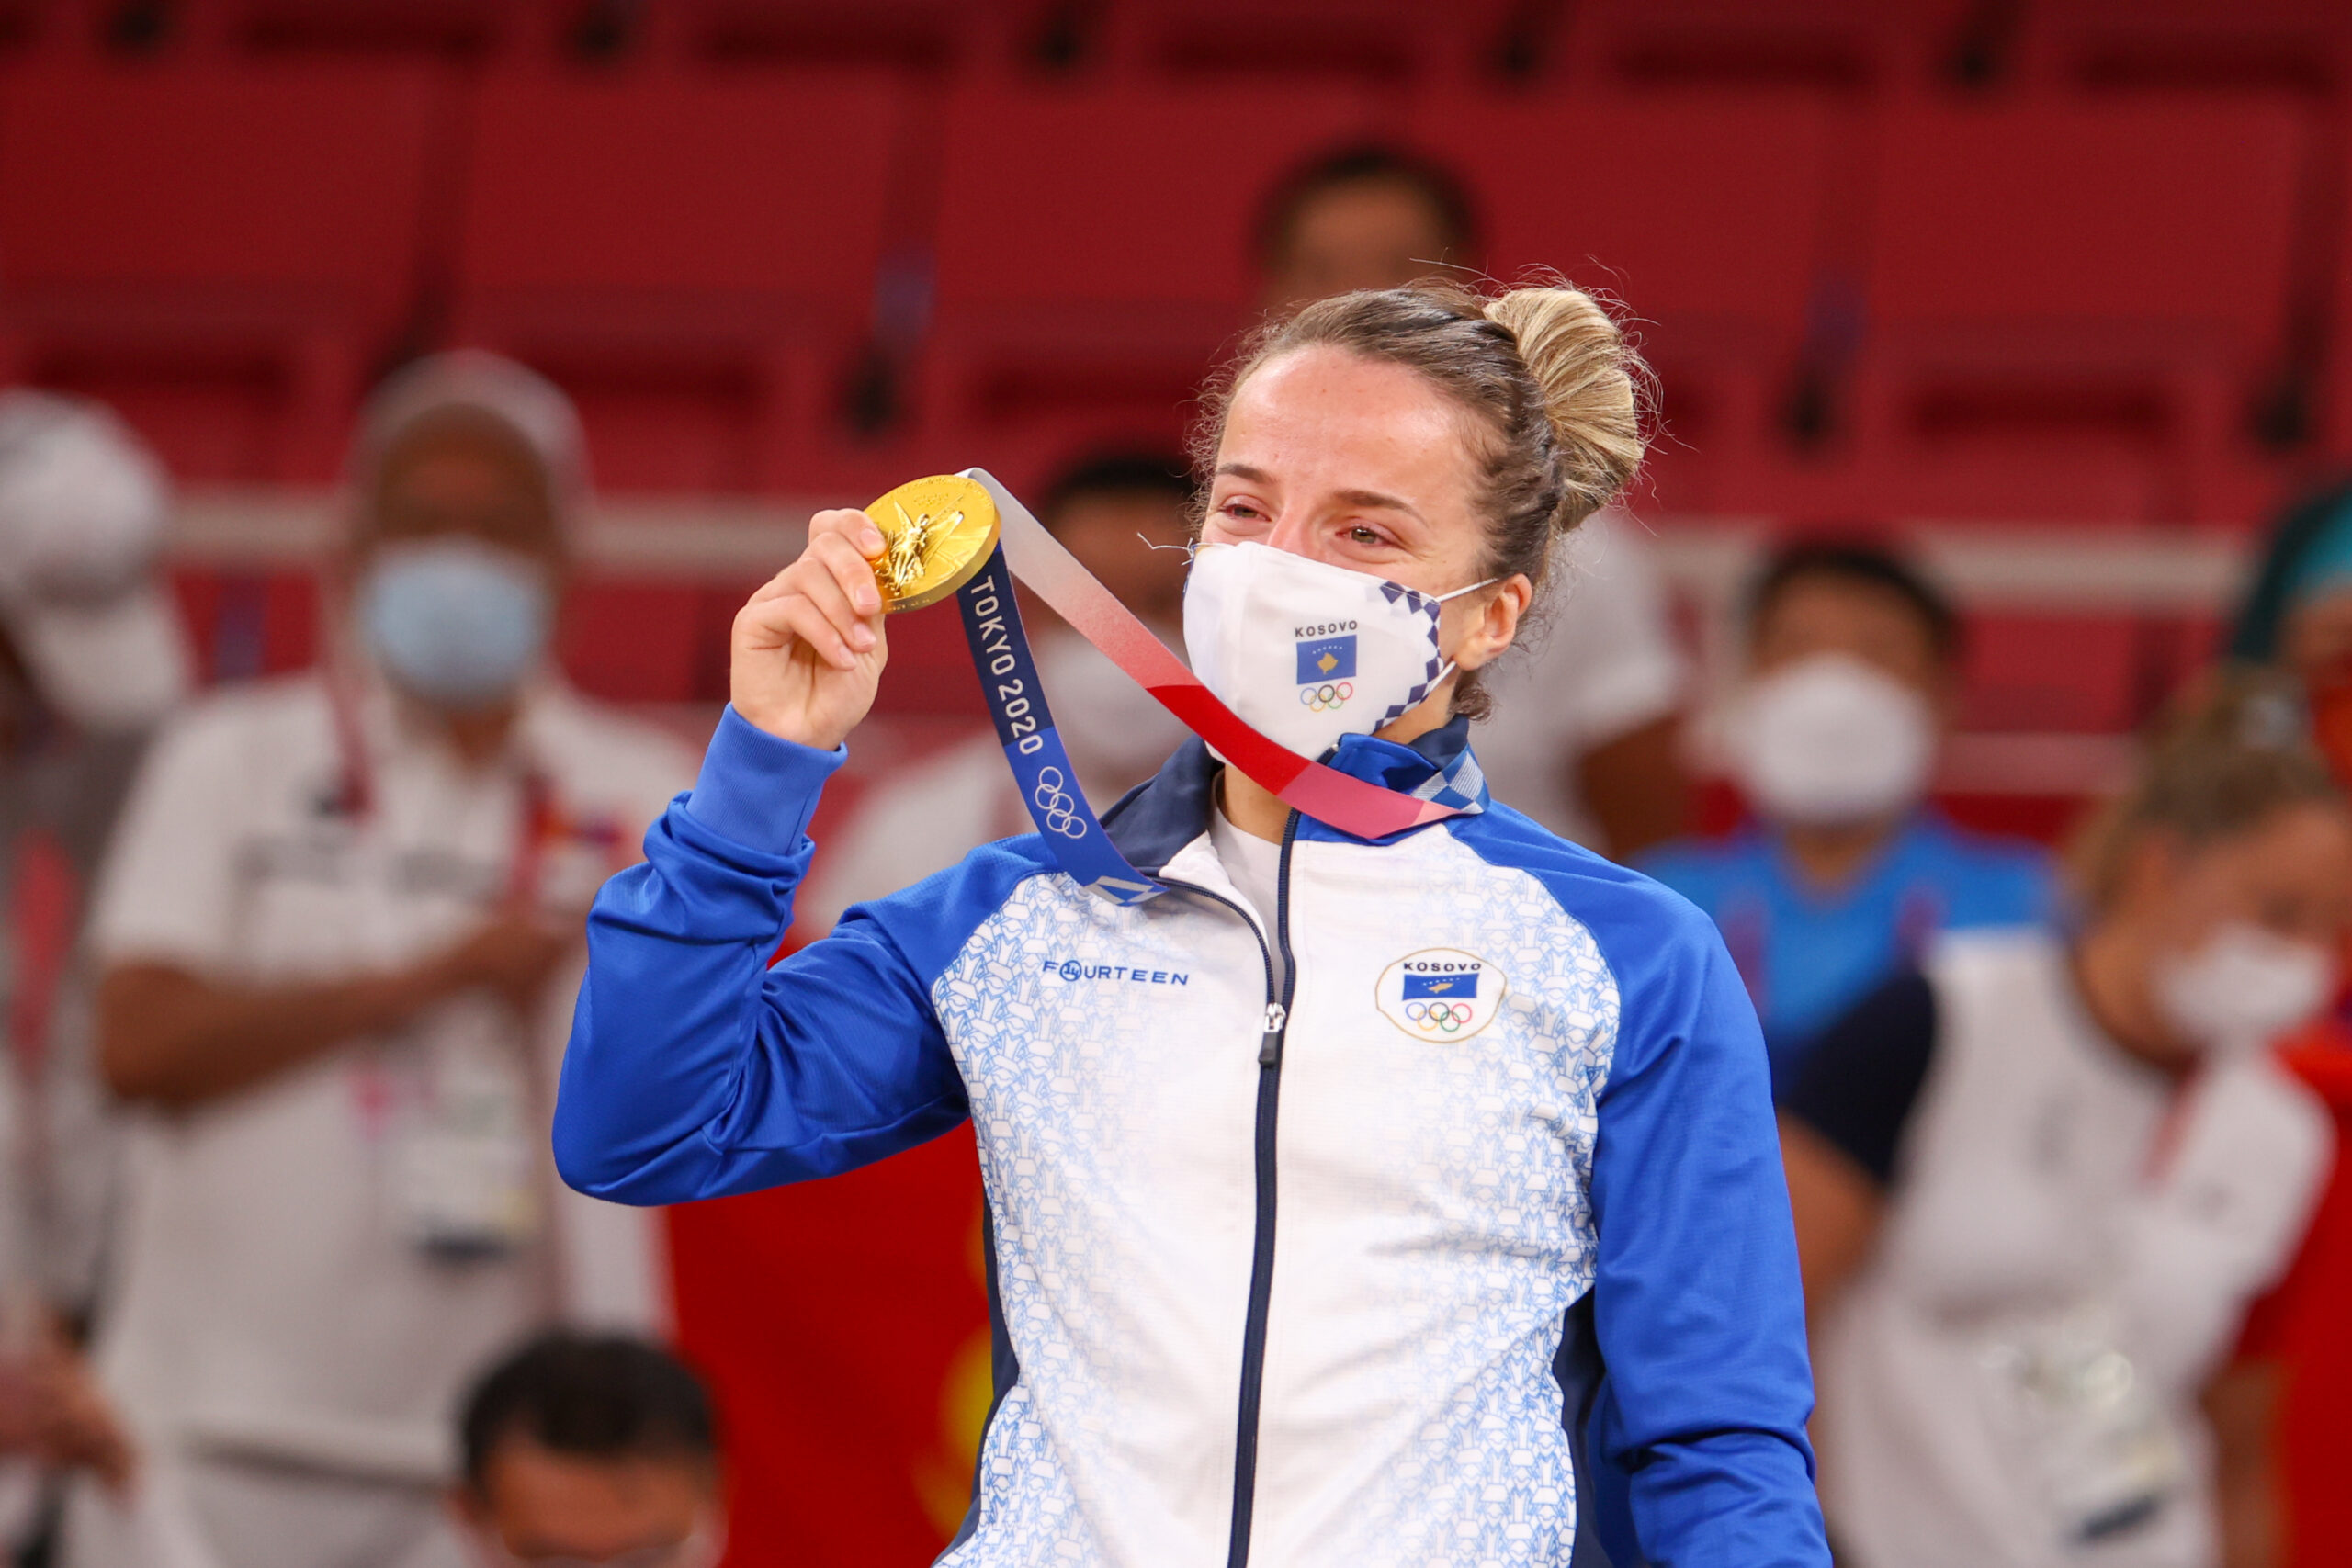 TRIO OF MEDALS FOR EUROPE ON DAY ONE OF OLYMPIC GAMES